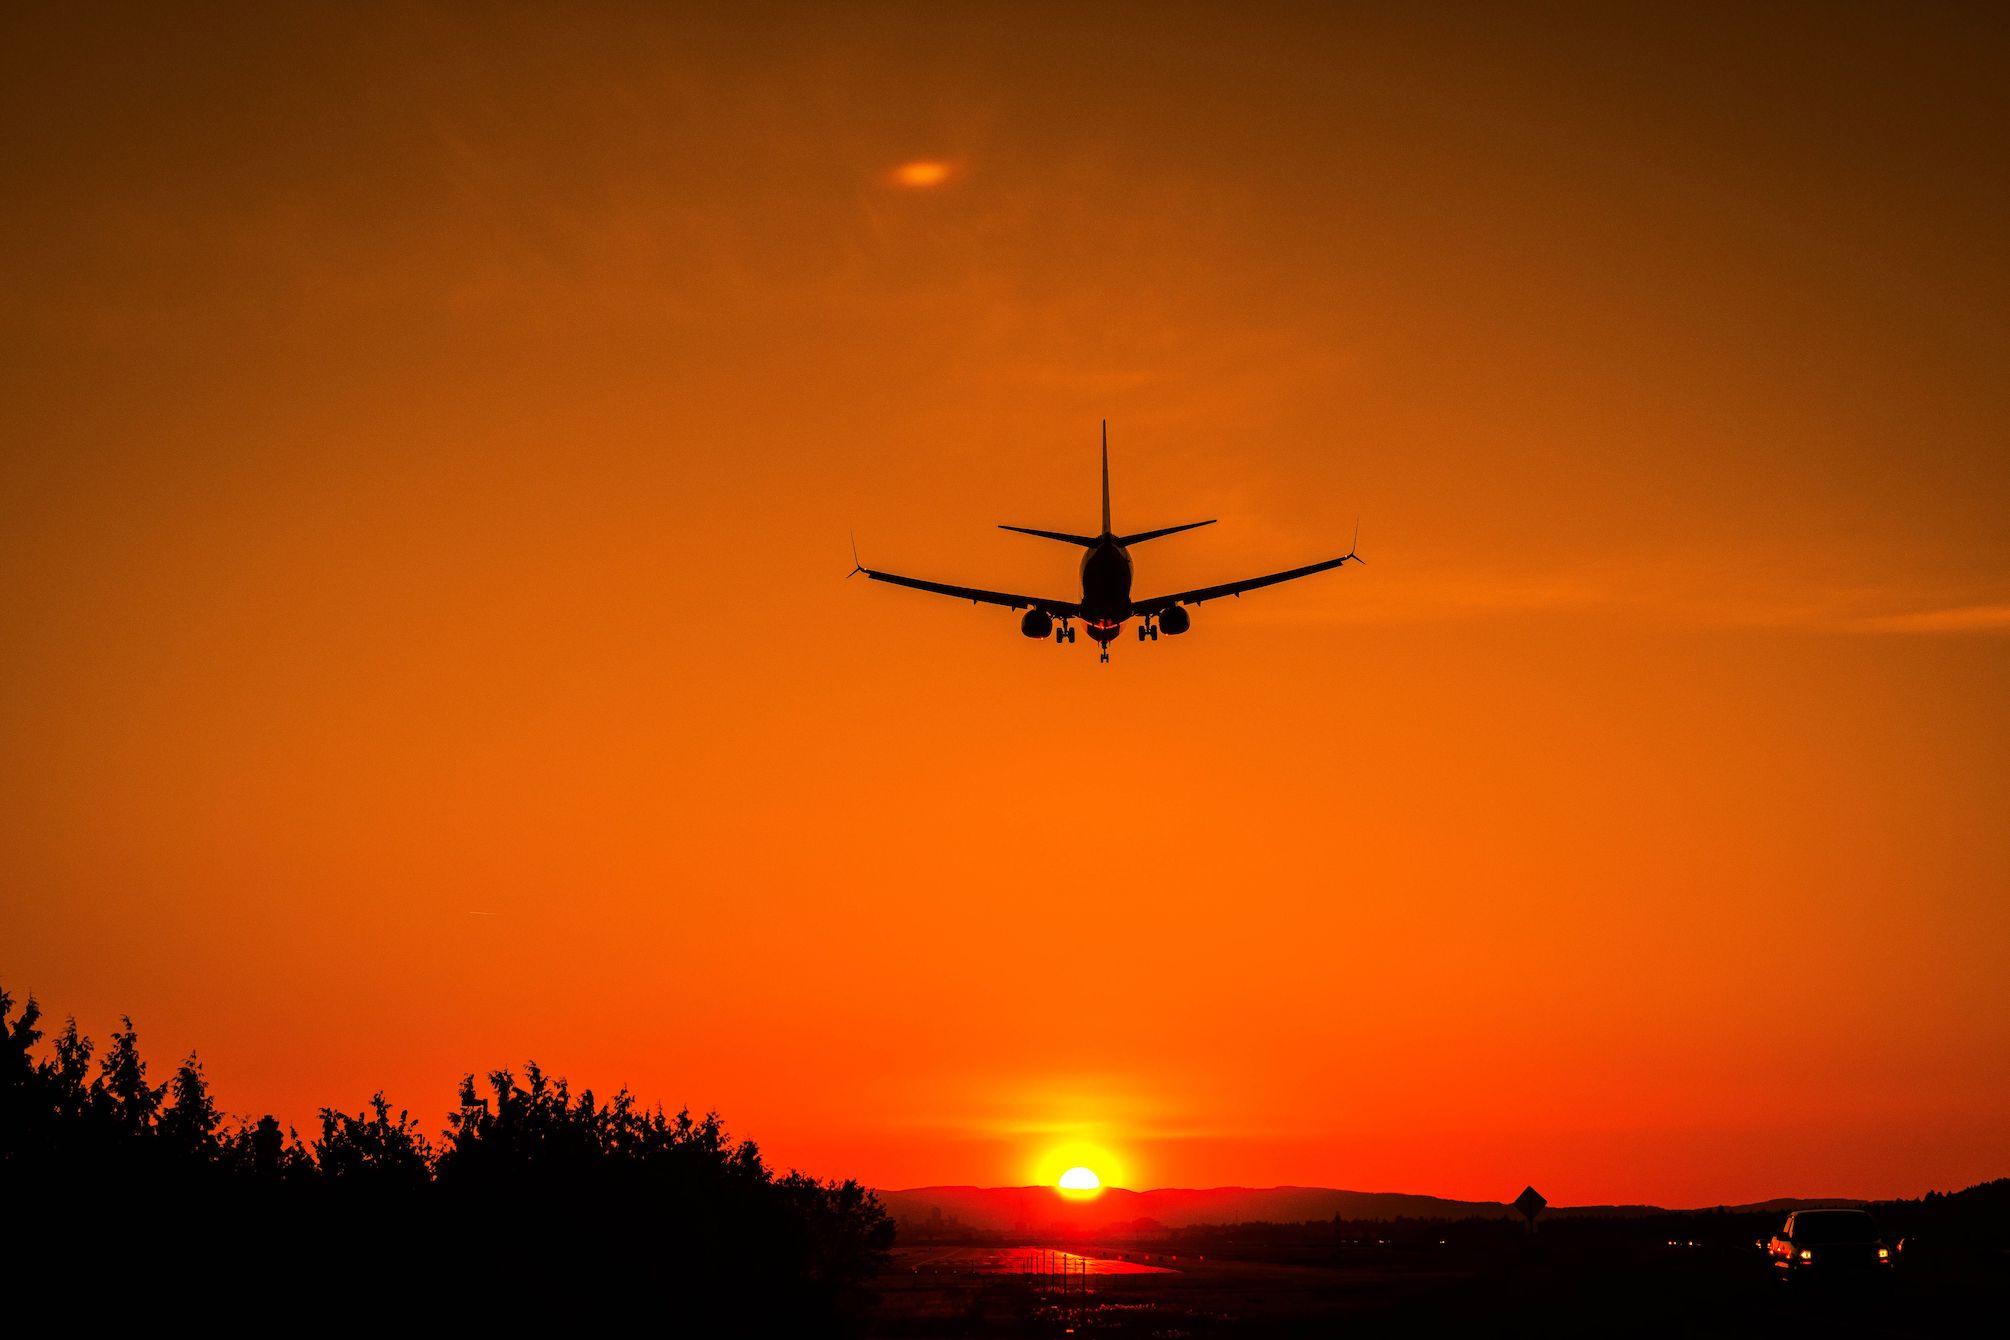 An airline jet seen from behind flying into the sunset